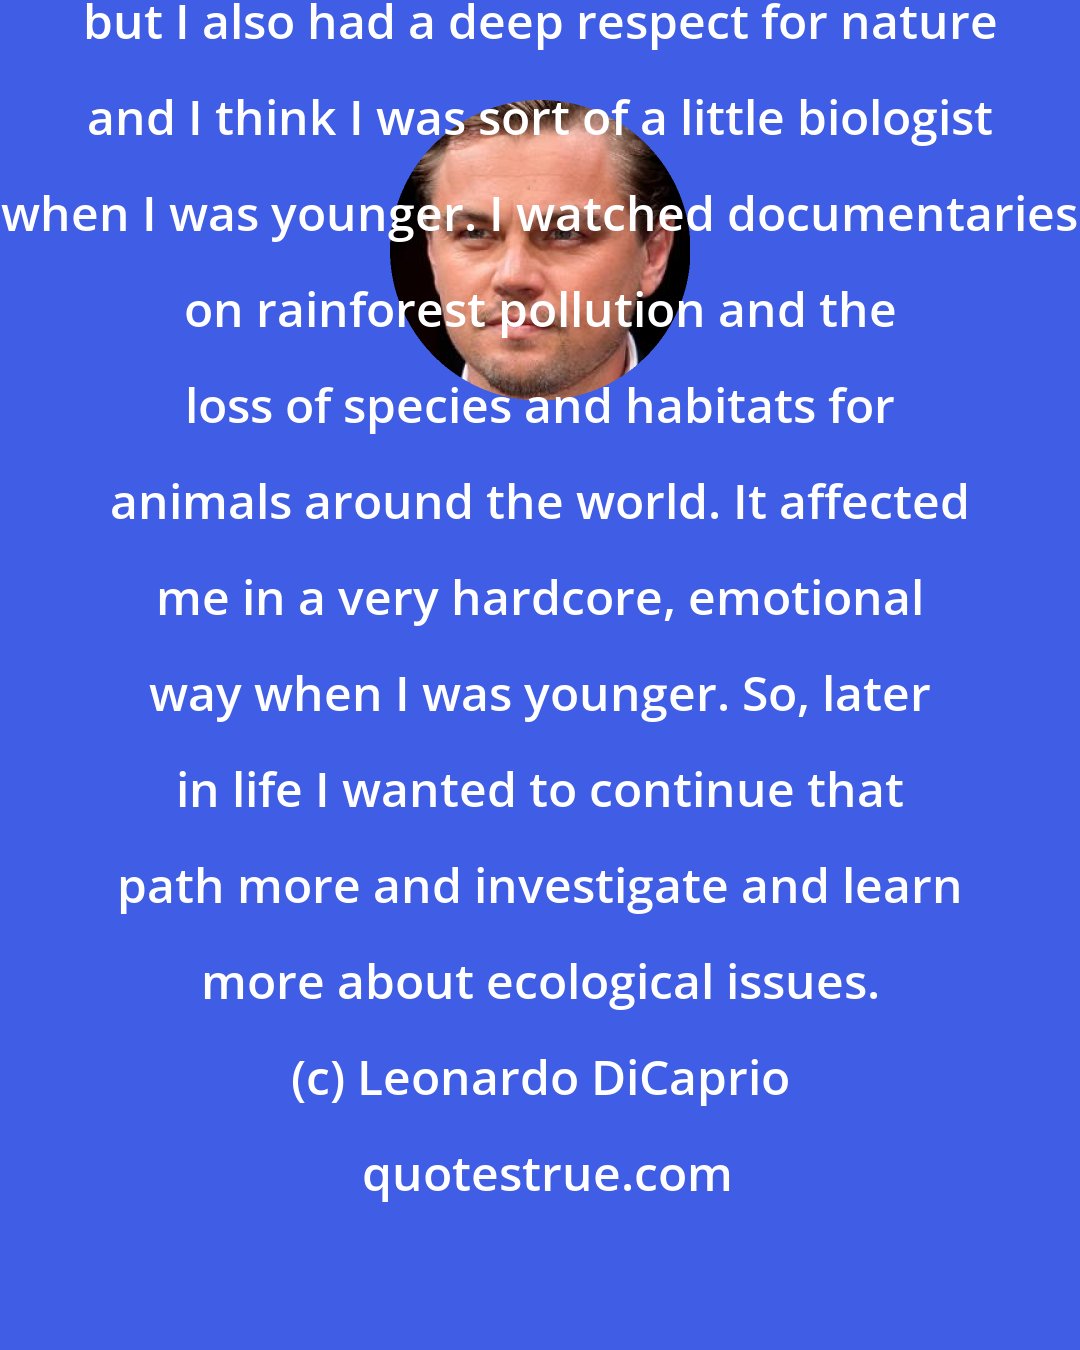 Leonardo DiCaprio: I became an actor at a very young age, but I also had a deep respect for nature and I think I was sort of a little biologist when I was younger. I watched documentaries on rainforest pollution and the loss of species and habitats for animals around the world. It affected me in a very hardcore, emotional way when I was younger. So, later in life I wanted to continue that path more and investigate and learn more about ecological issues.